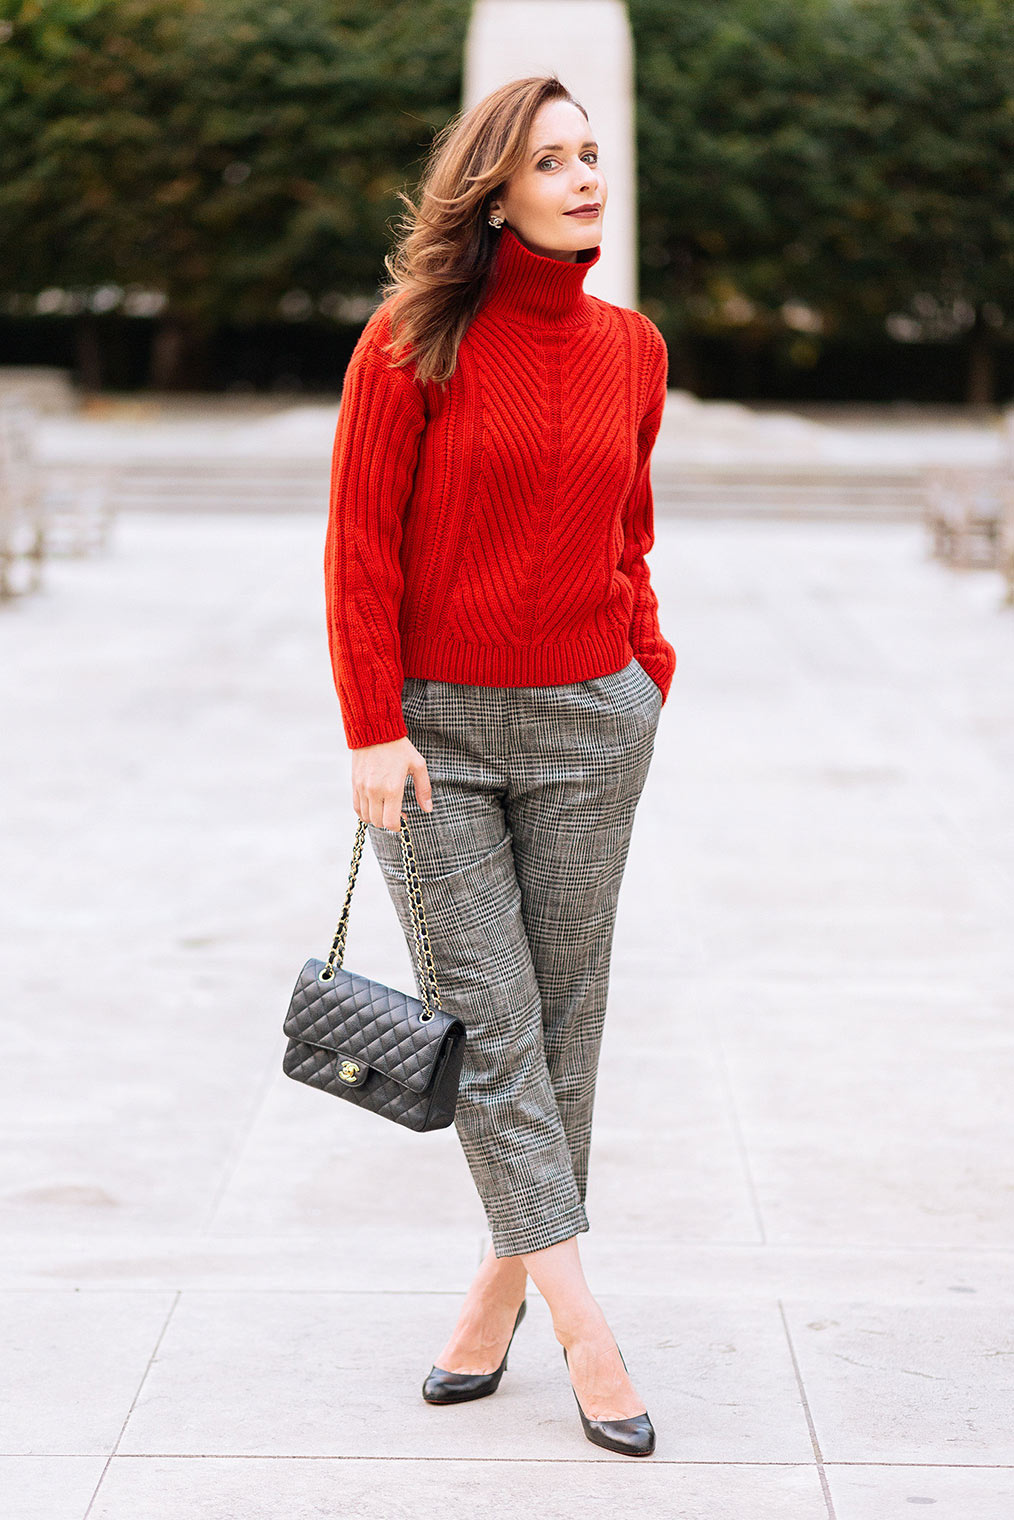 Fall trend red sweater